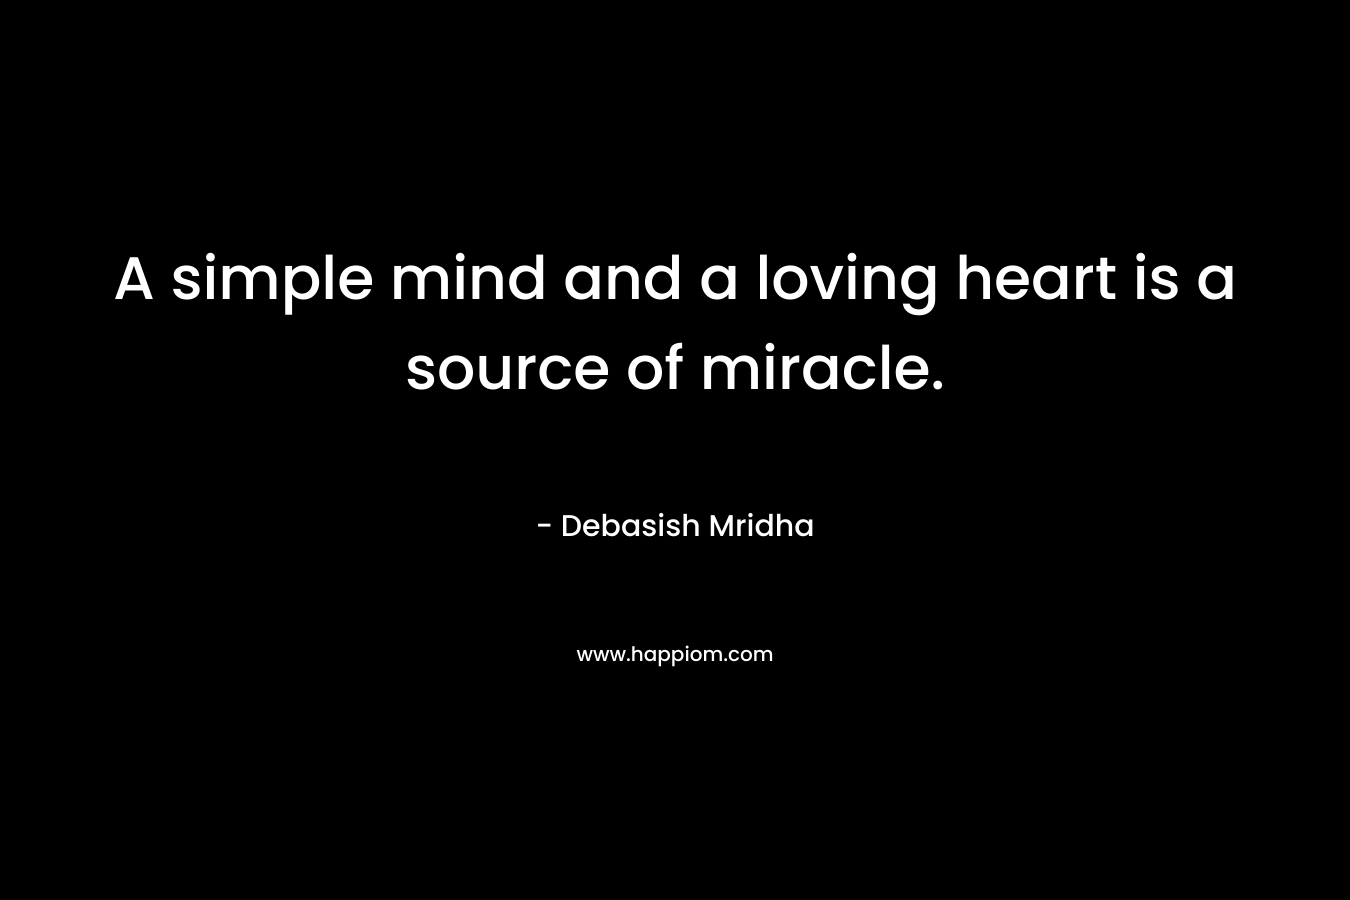 A simple mind and a loving heart is a source of miracle.